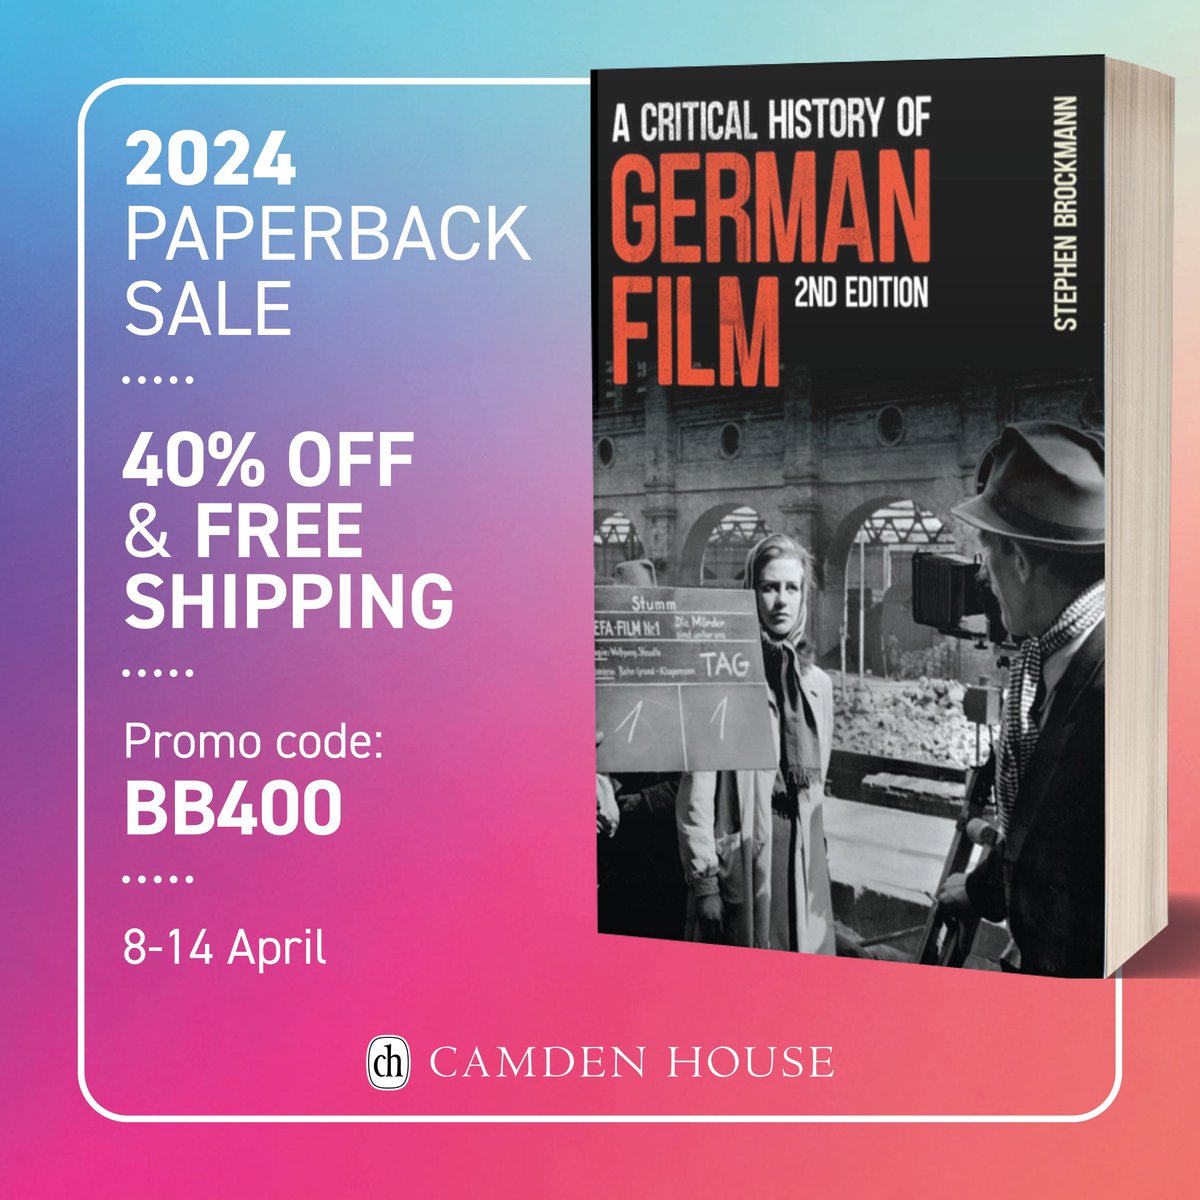 Just one of many books on #GermanFilm included in our paperback sale, now on until 14 April. Quote promo code BB400 to save 40% and get free shipping too! buff.ly/49fuKDT #BookSale #FilmStudies